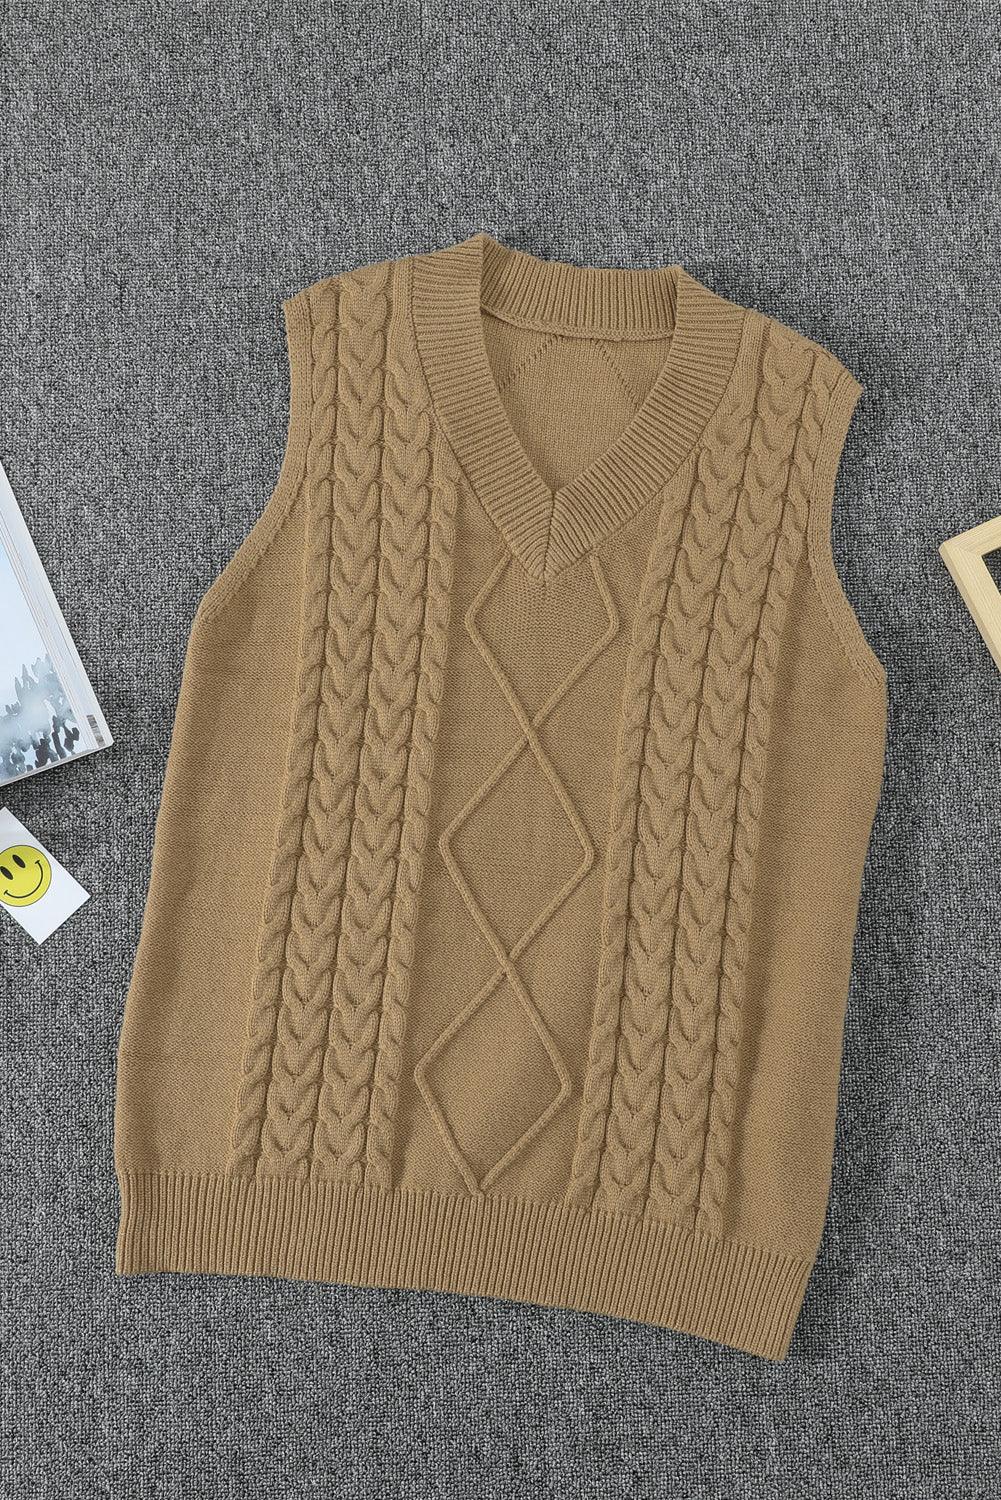 Khaki Sleeveless Cable Knitted Sweater Tank